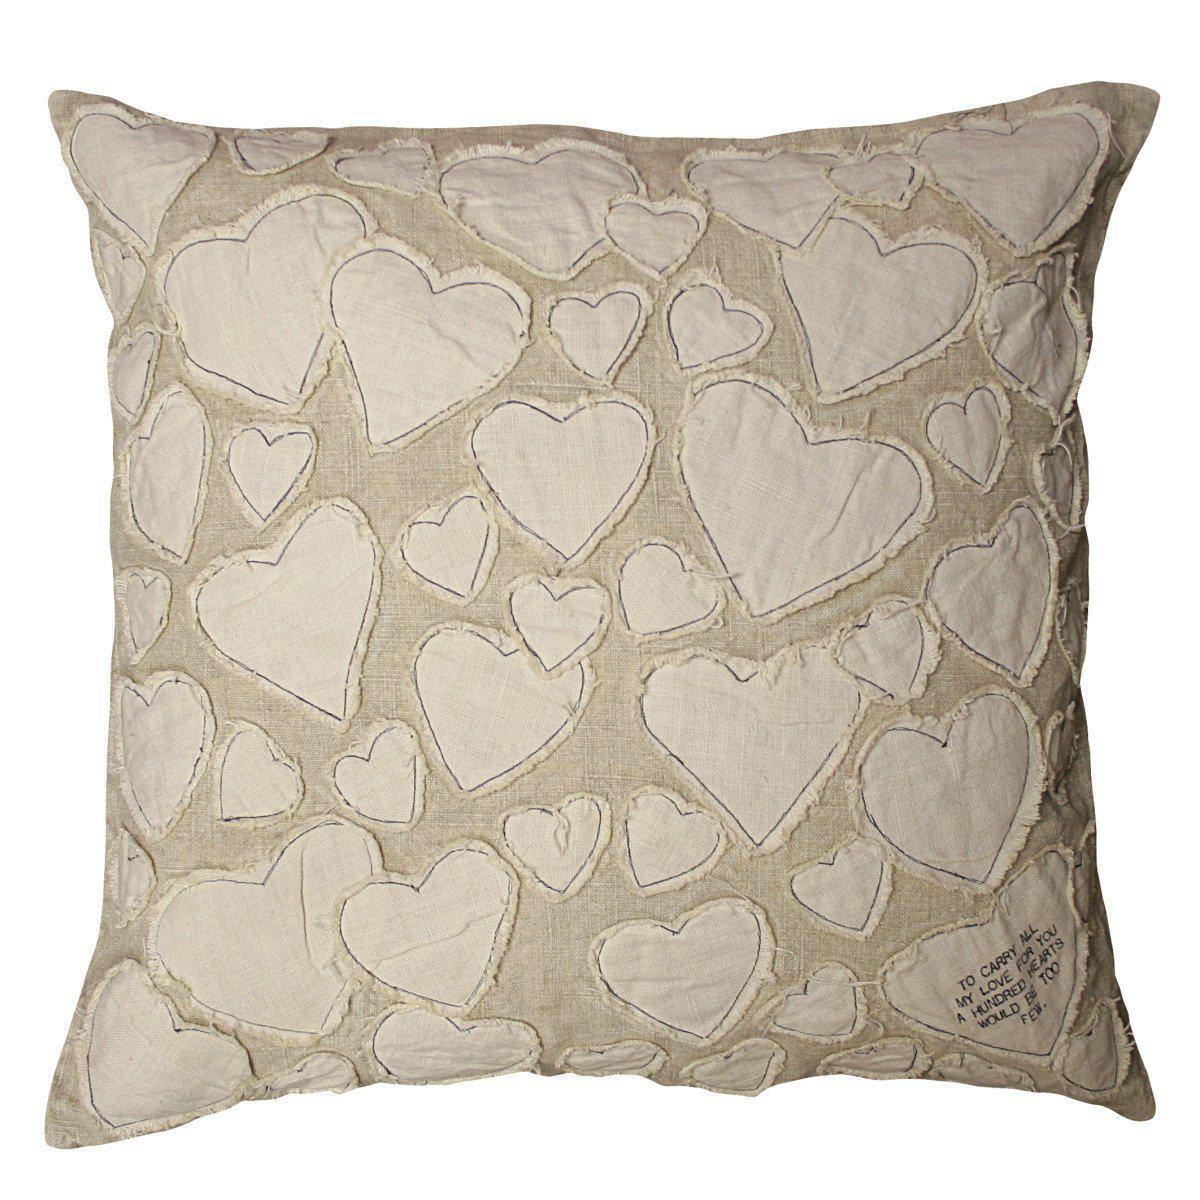 Sugarboo Designs To Carry All My Love Pillow